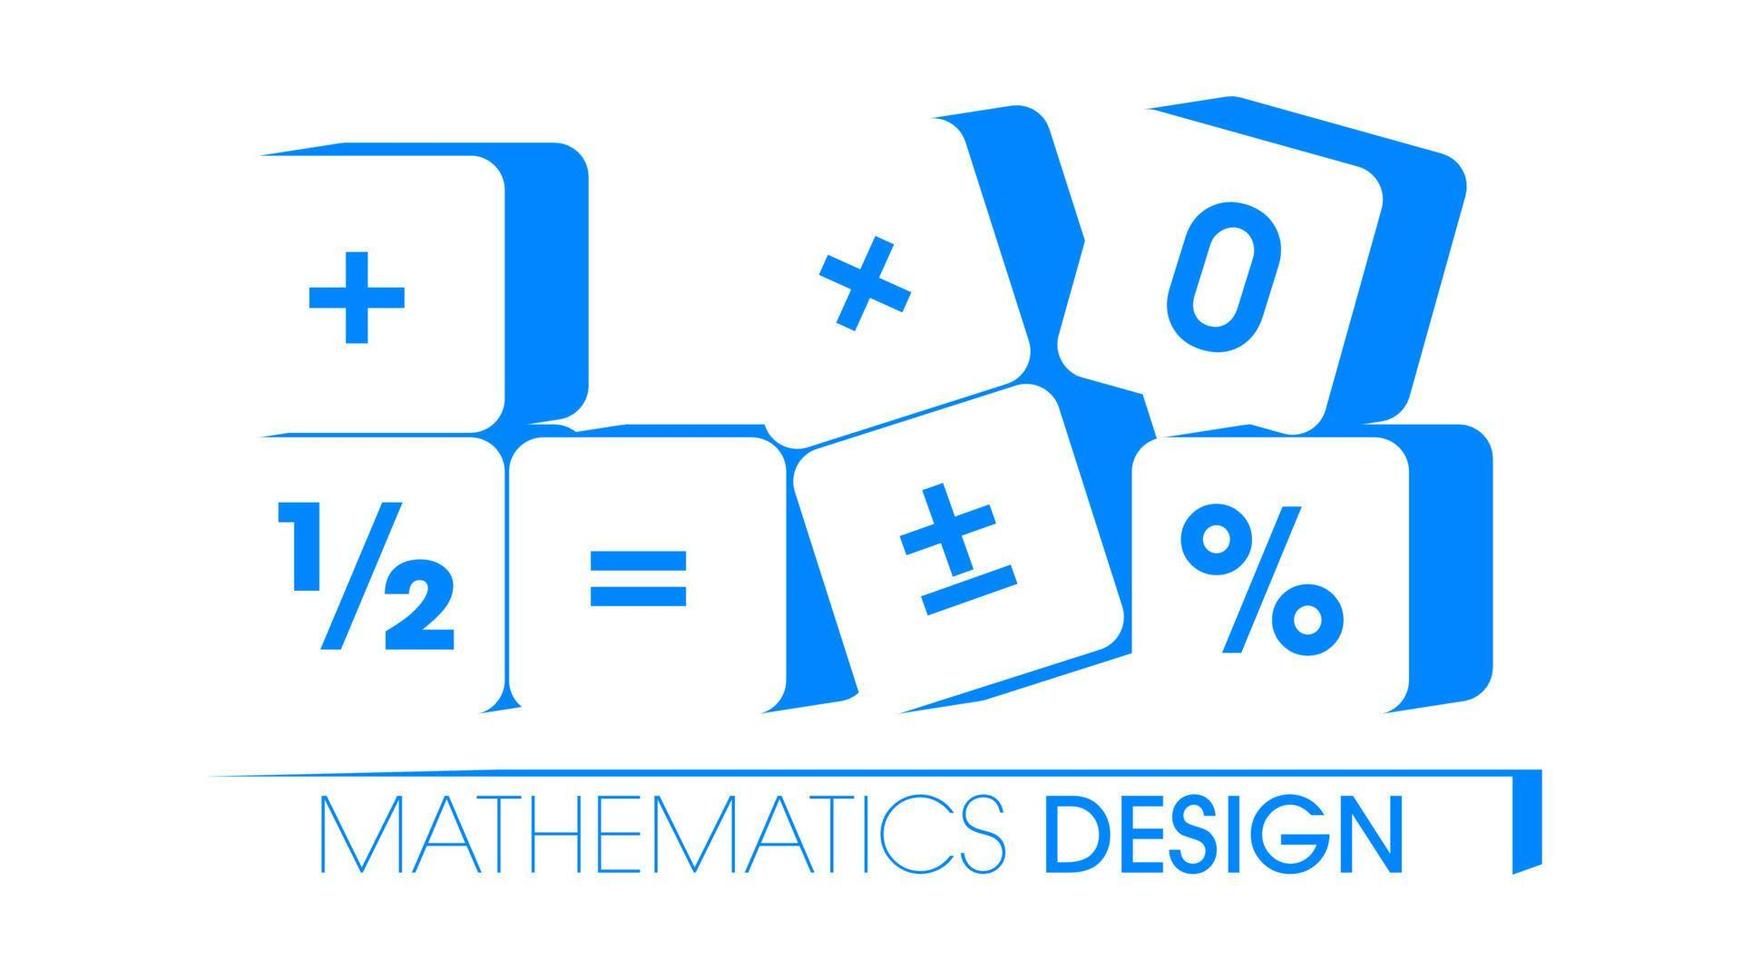 cube design mathematical science for school education, university, and kids vector